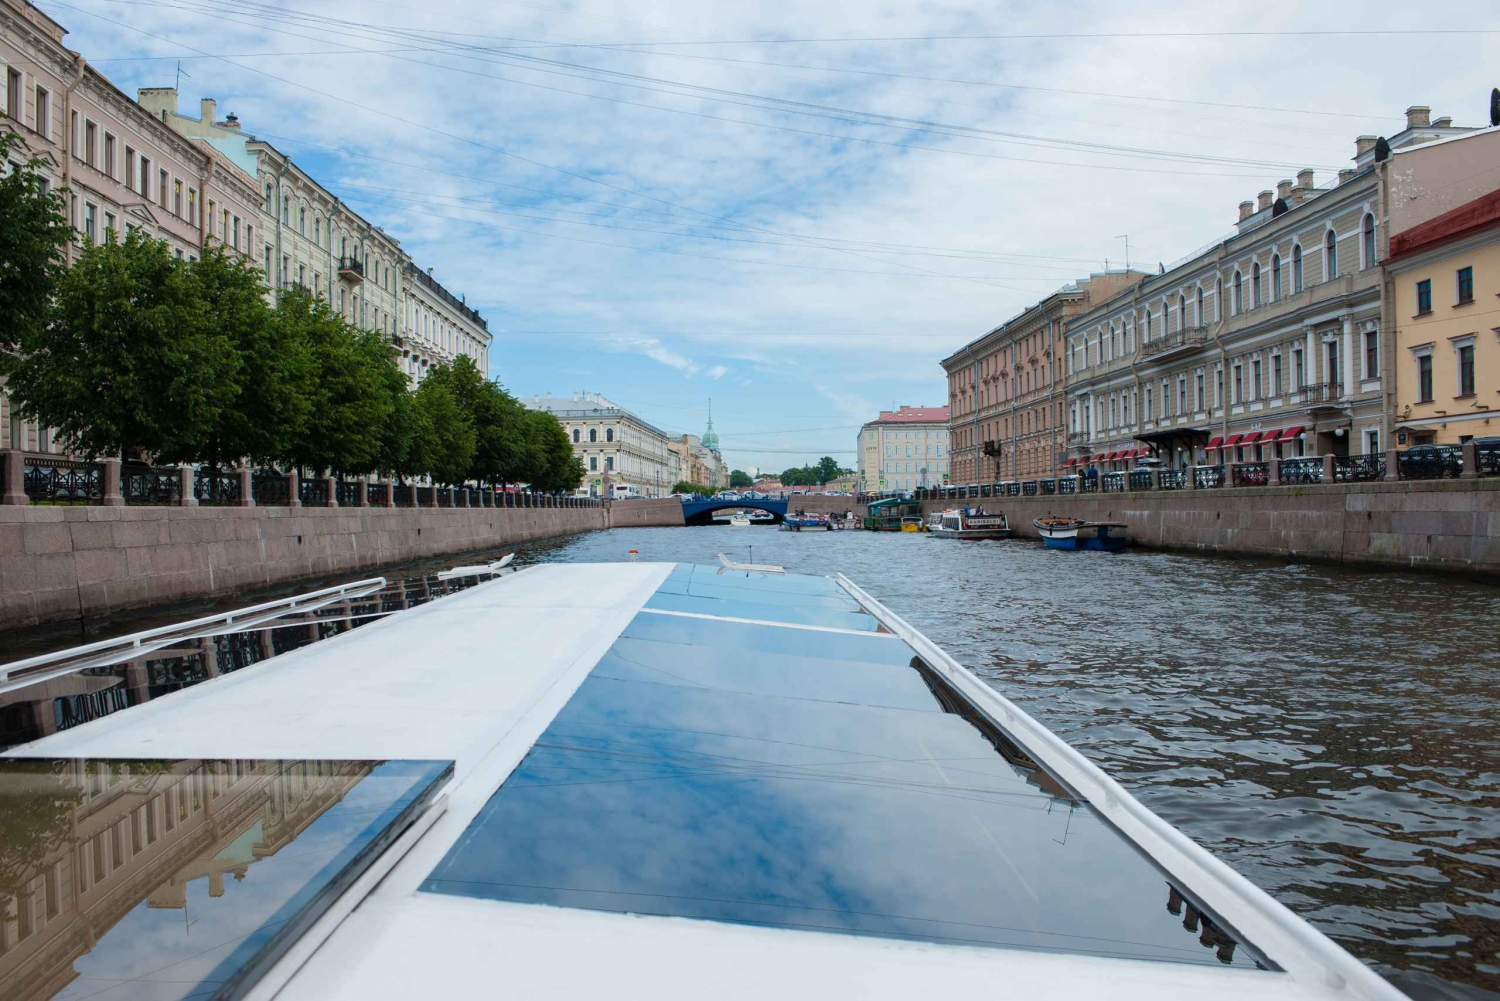 St. Petersburg: 'Northern Venice' Day Boat Tour